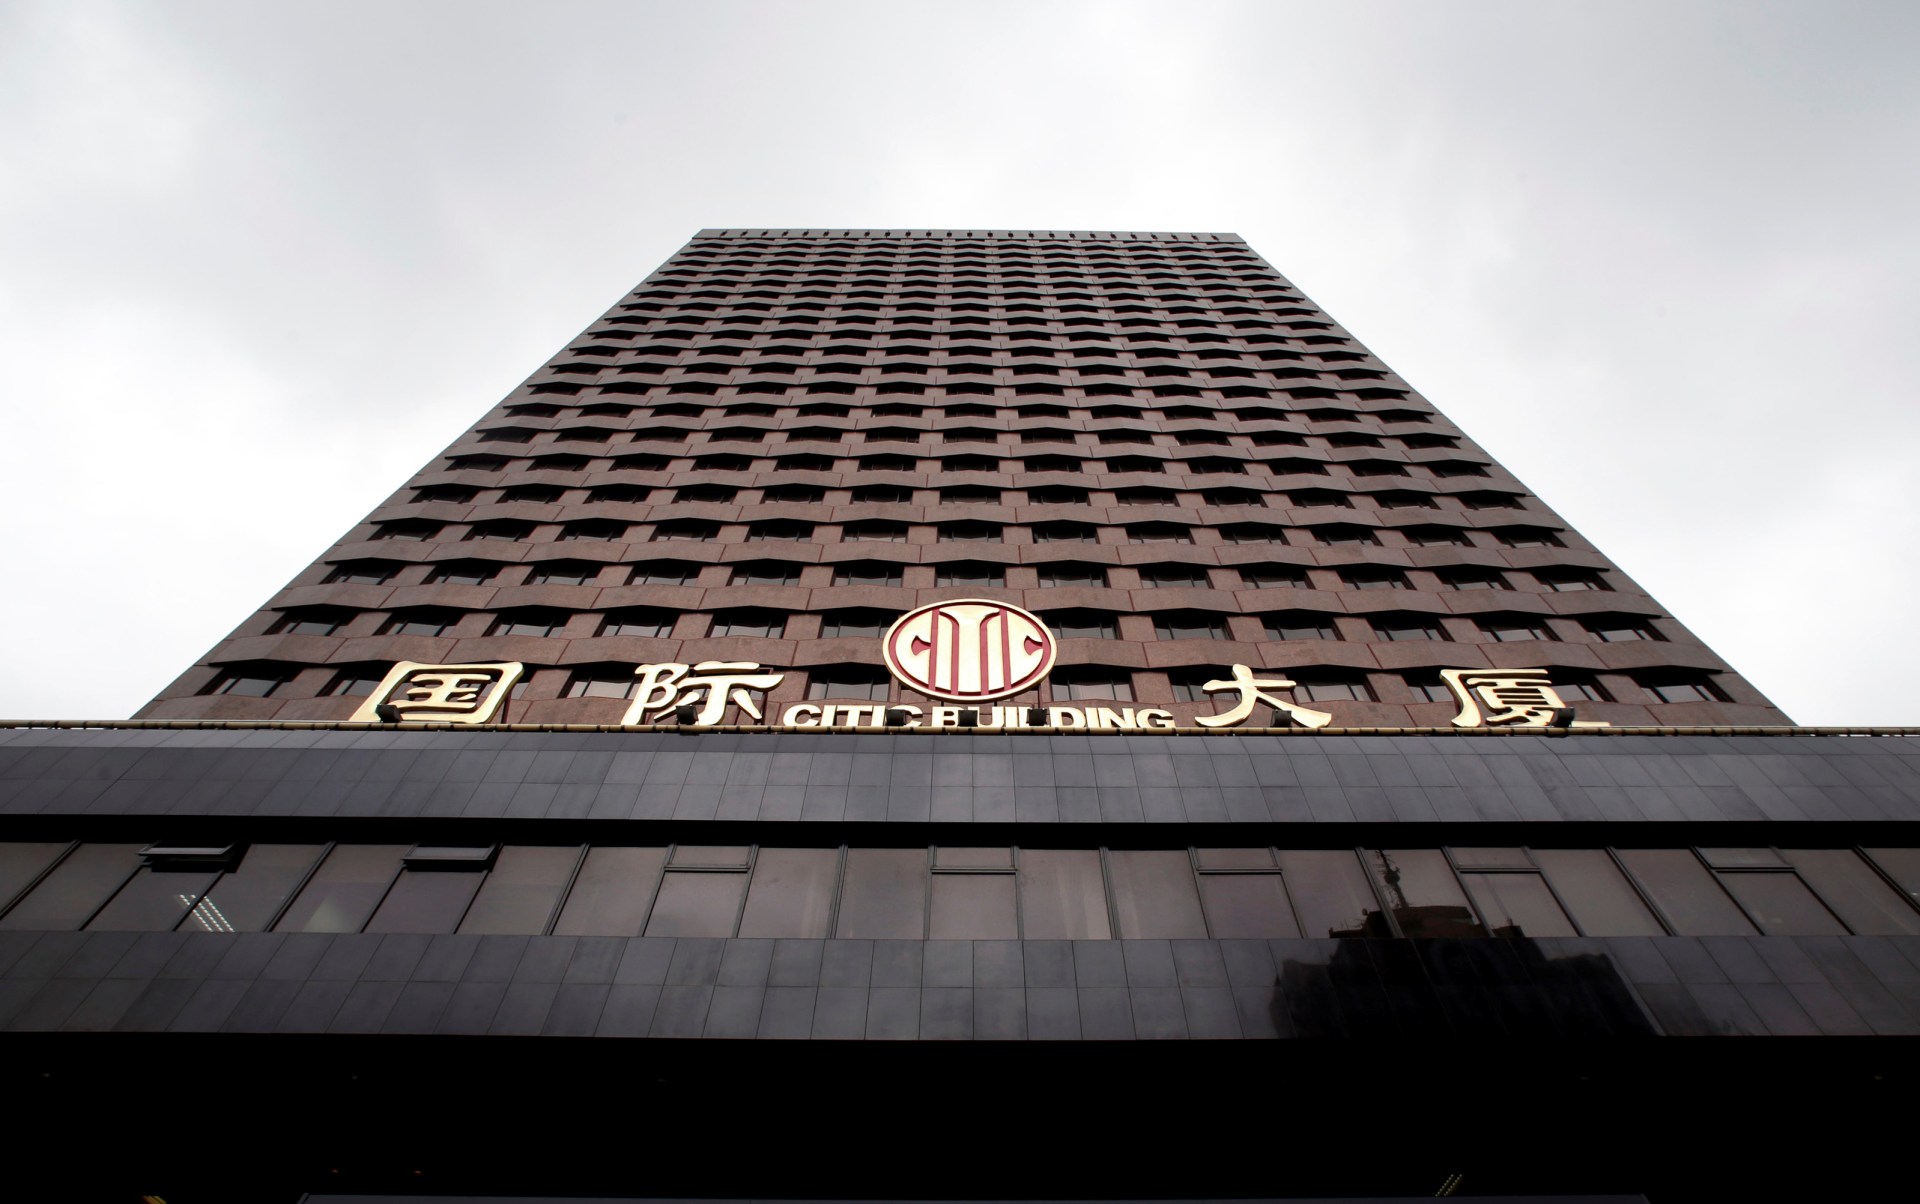 CITIC granted approval to sell 50bln yuan of bonds